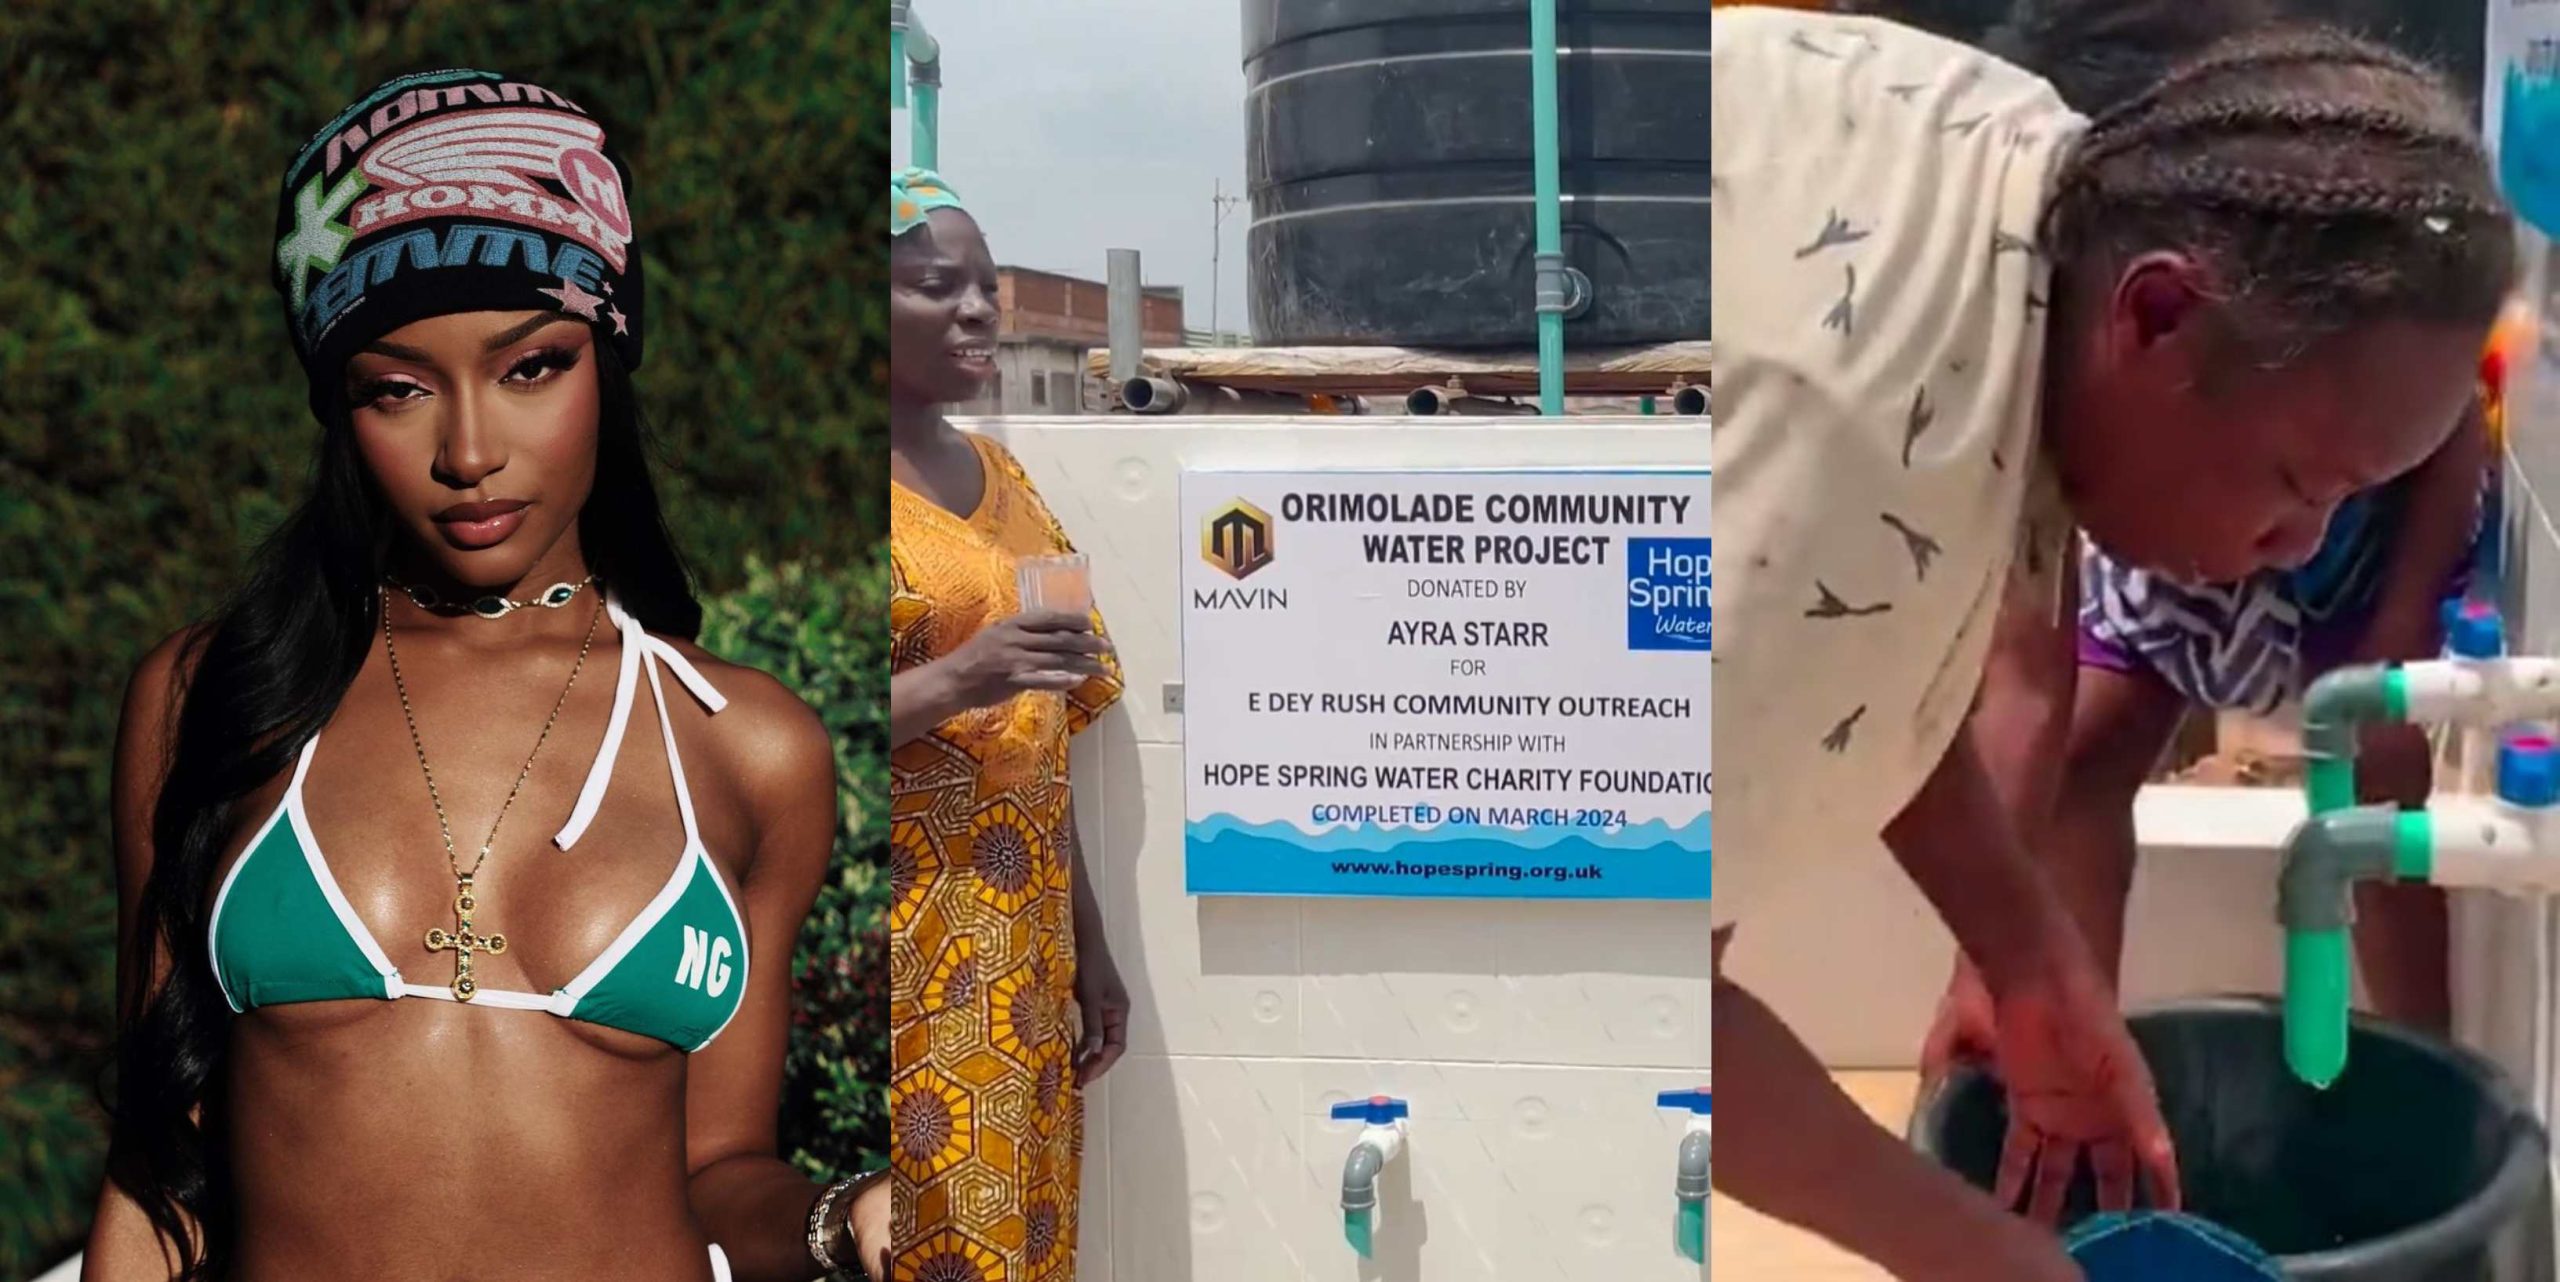 Singer Ayra Starr says as she funds borehole installation for a community